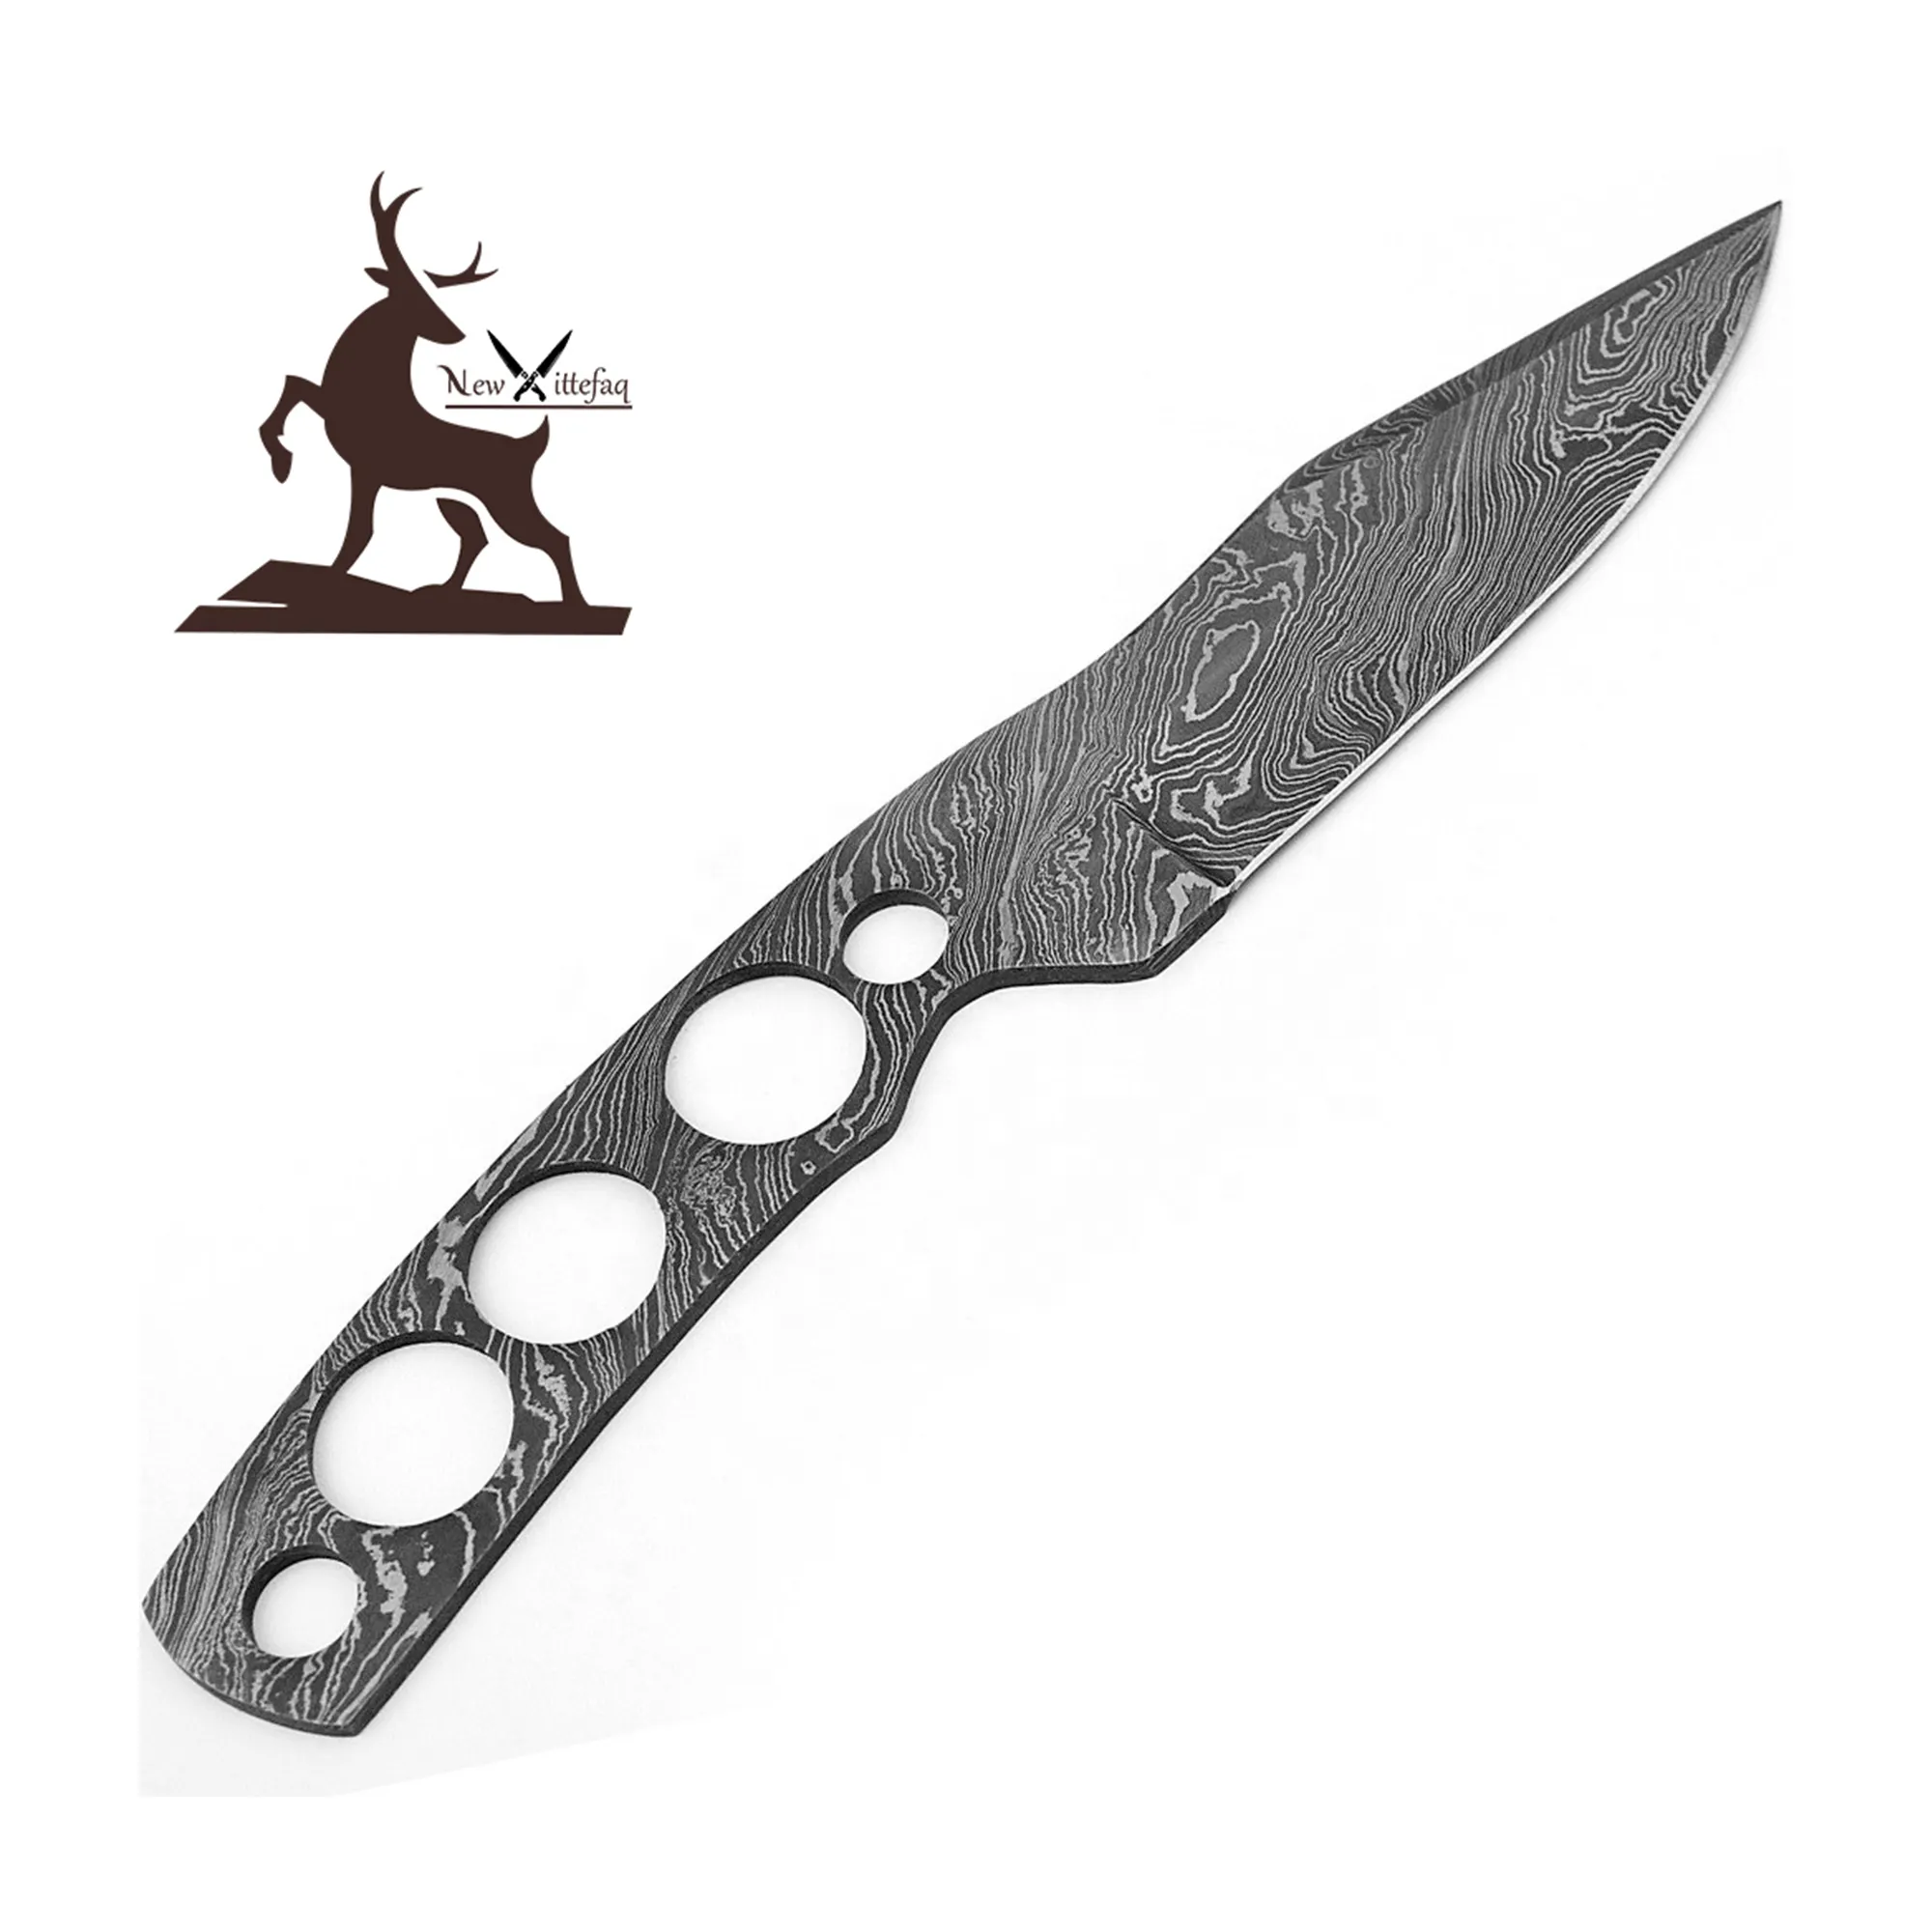 Damascus hunting knife blank blade tracker survival tactical knife saw blade decorative fancy knives